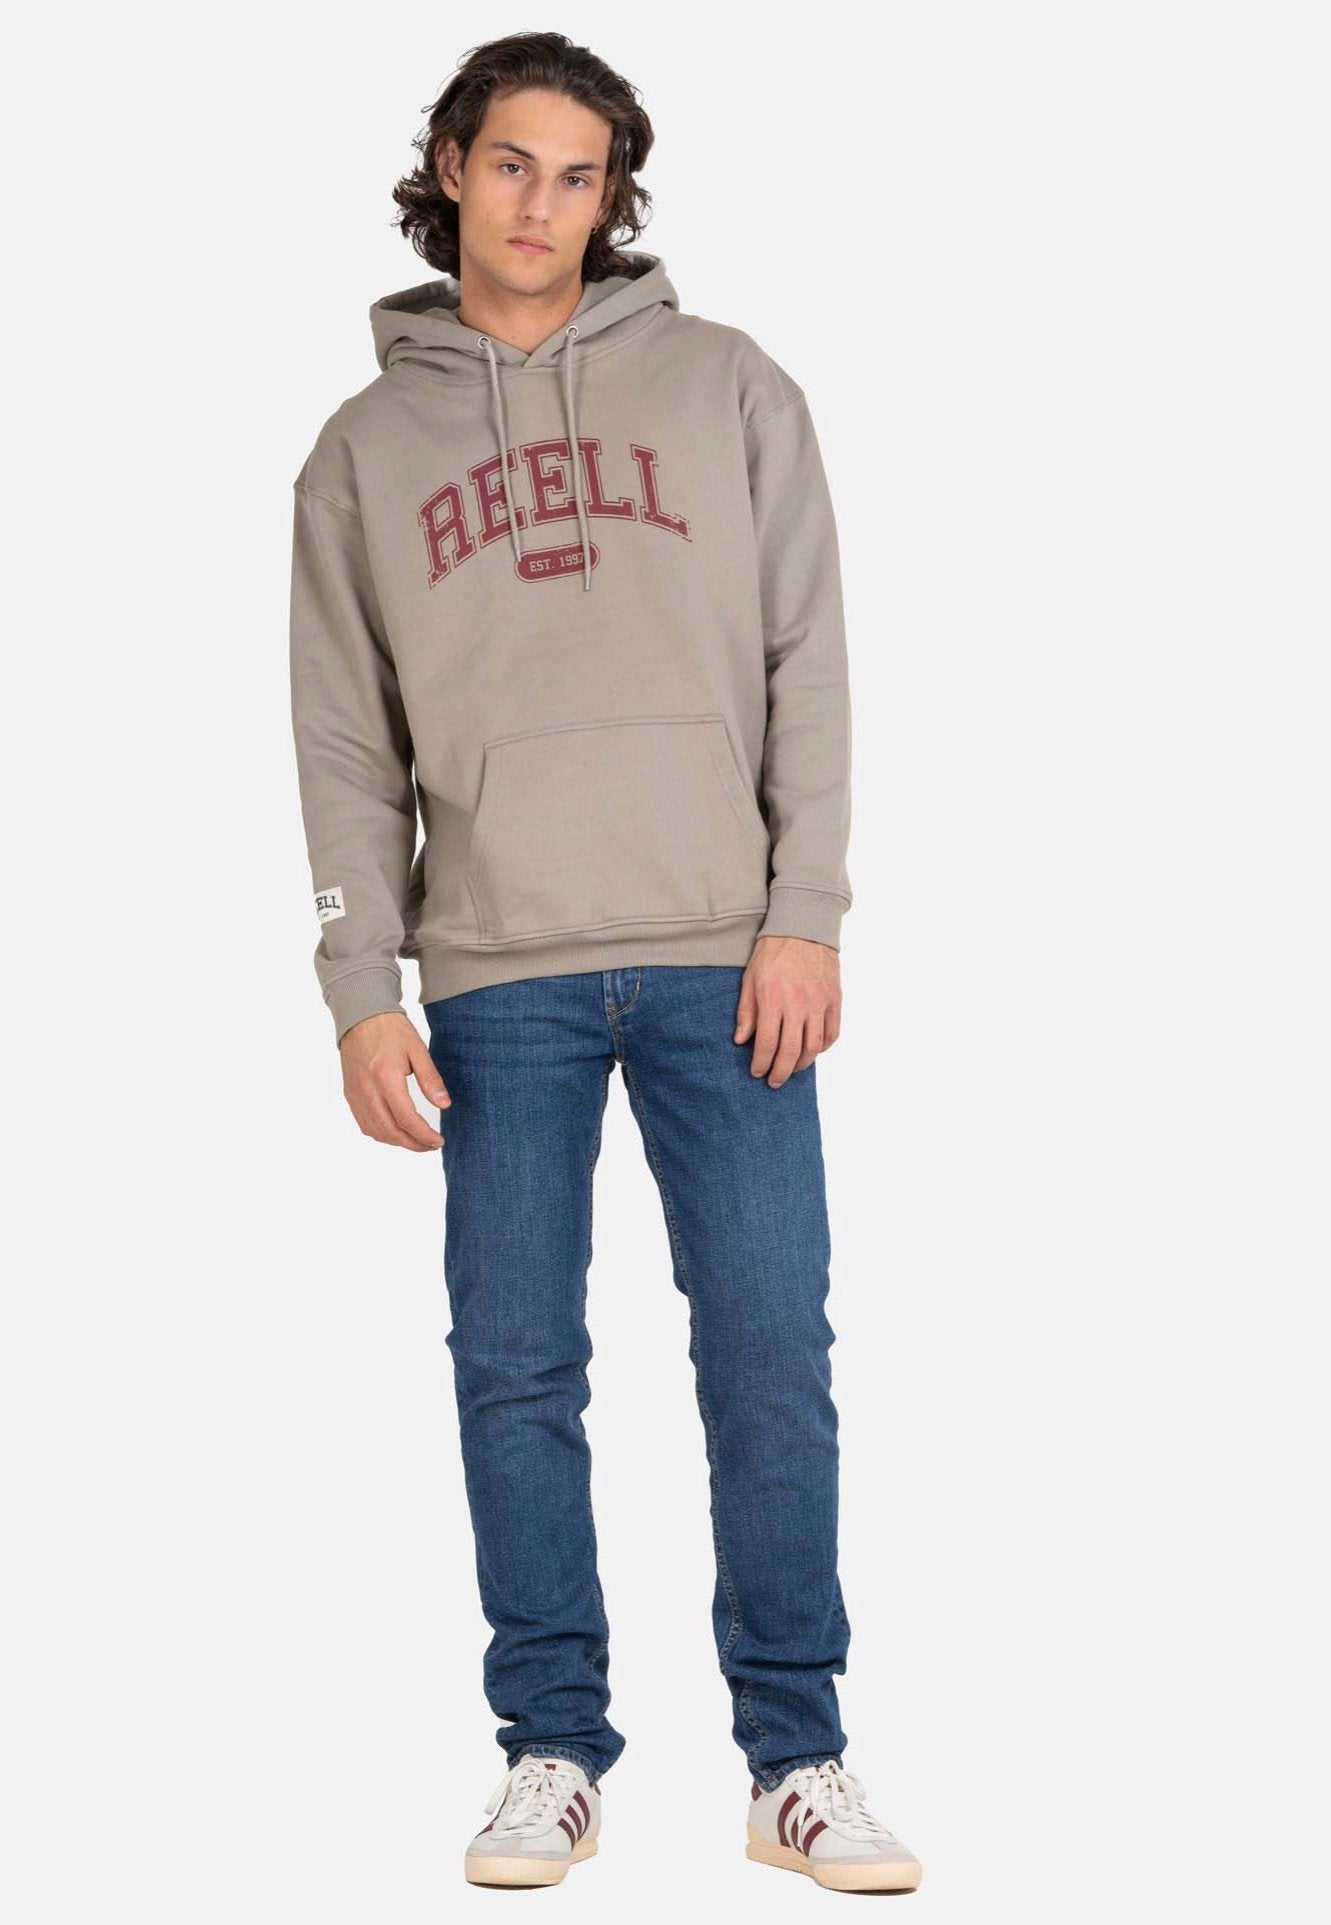 REELL - Spider Mid Blue Wash - Jeans